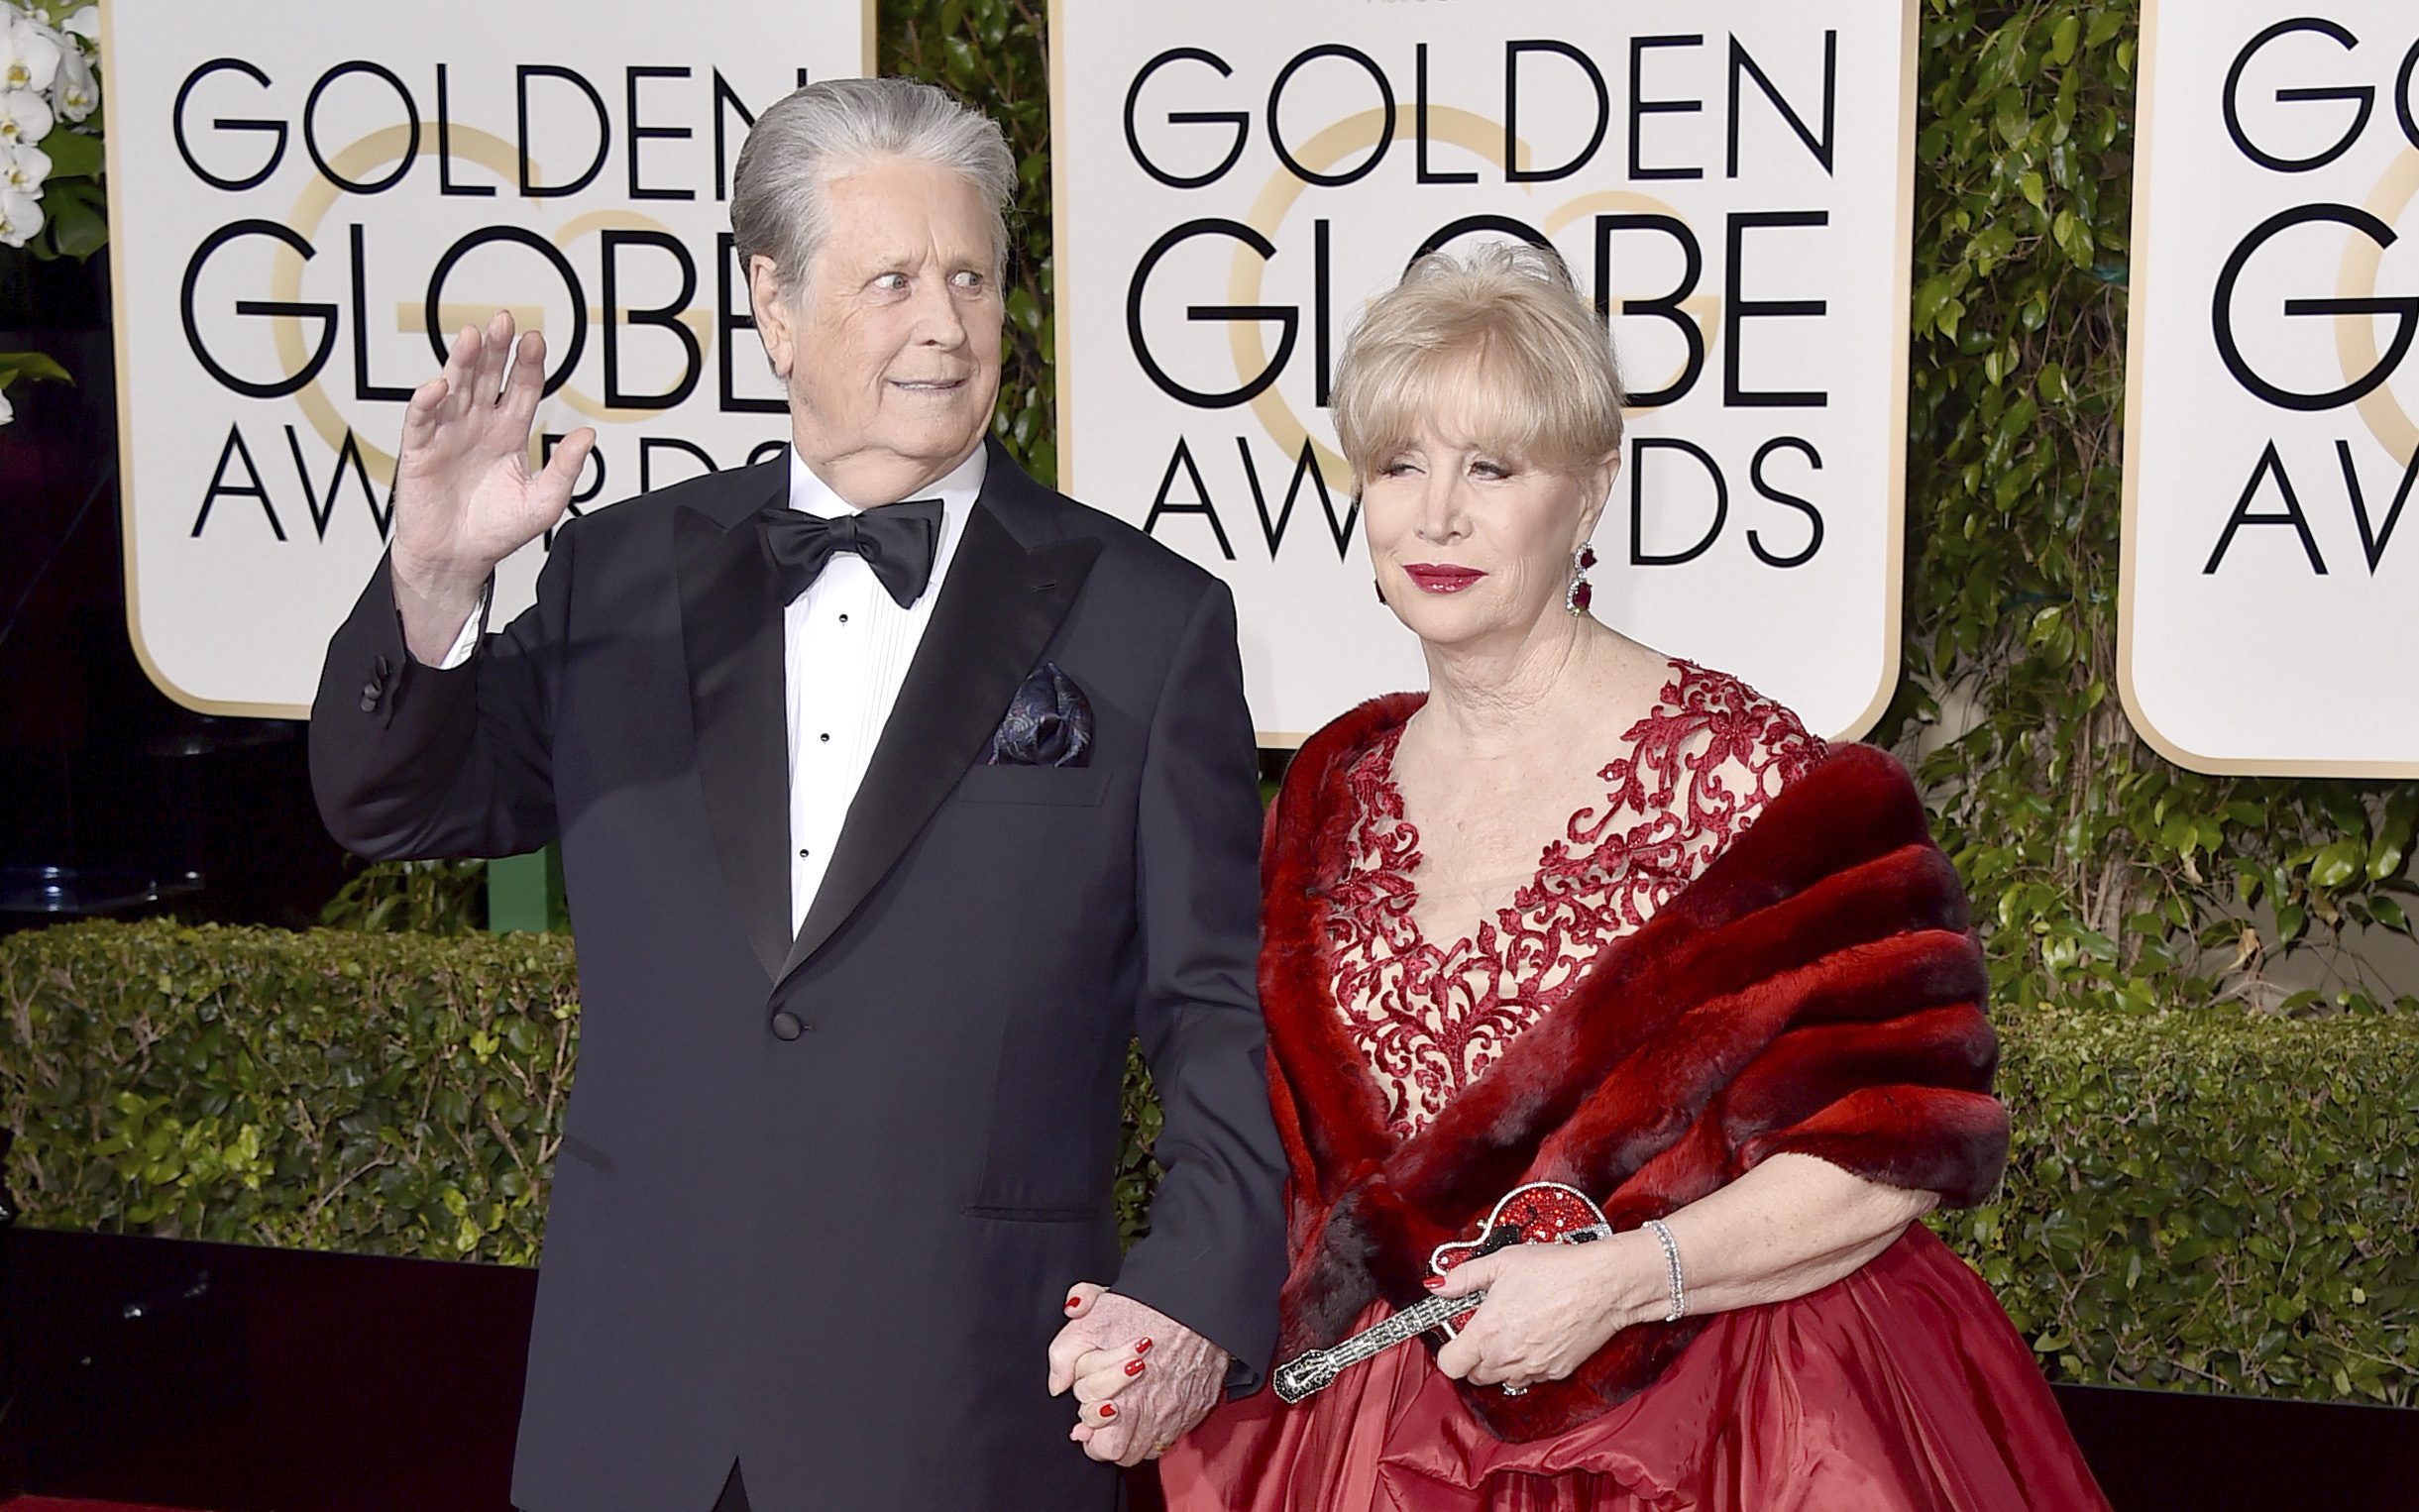 FILE - Brian Wilson, left, and his wife Melinda Ledbetter arrive at the 73rd annual Golden Globe Awards in Beverly Hills, Calif., on Jan. 10, 2016. The management team of the Beach Boys co-founder has filed papers to put him in a conservatorship. The court filing says Wilson needs someone to oversee his daily life and medical decisions because of the recent death of his wife. (Photo by Jordan Strauss/Invision/AP, File)